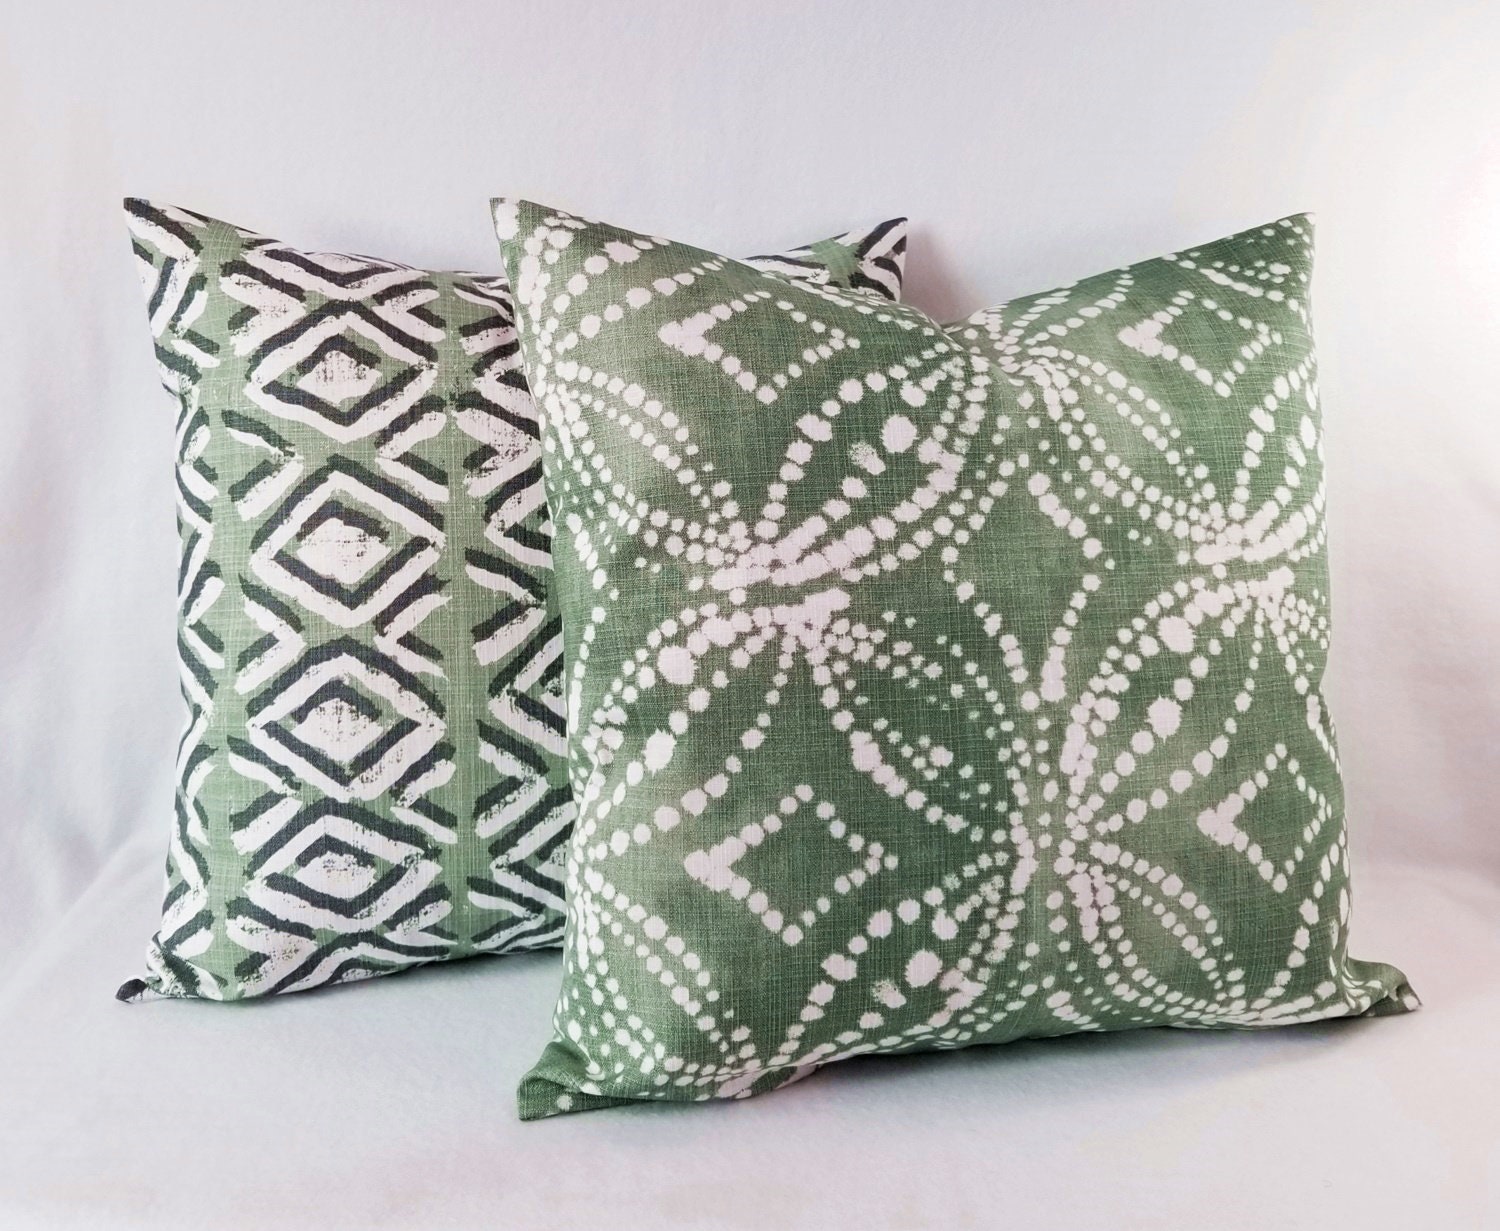 Two Soft Green Decorative Pillow Covers Two White and Green | Etsy